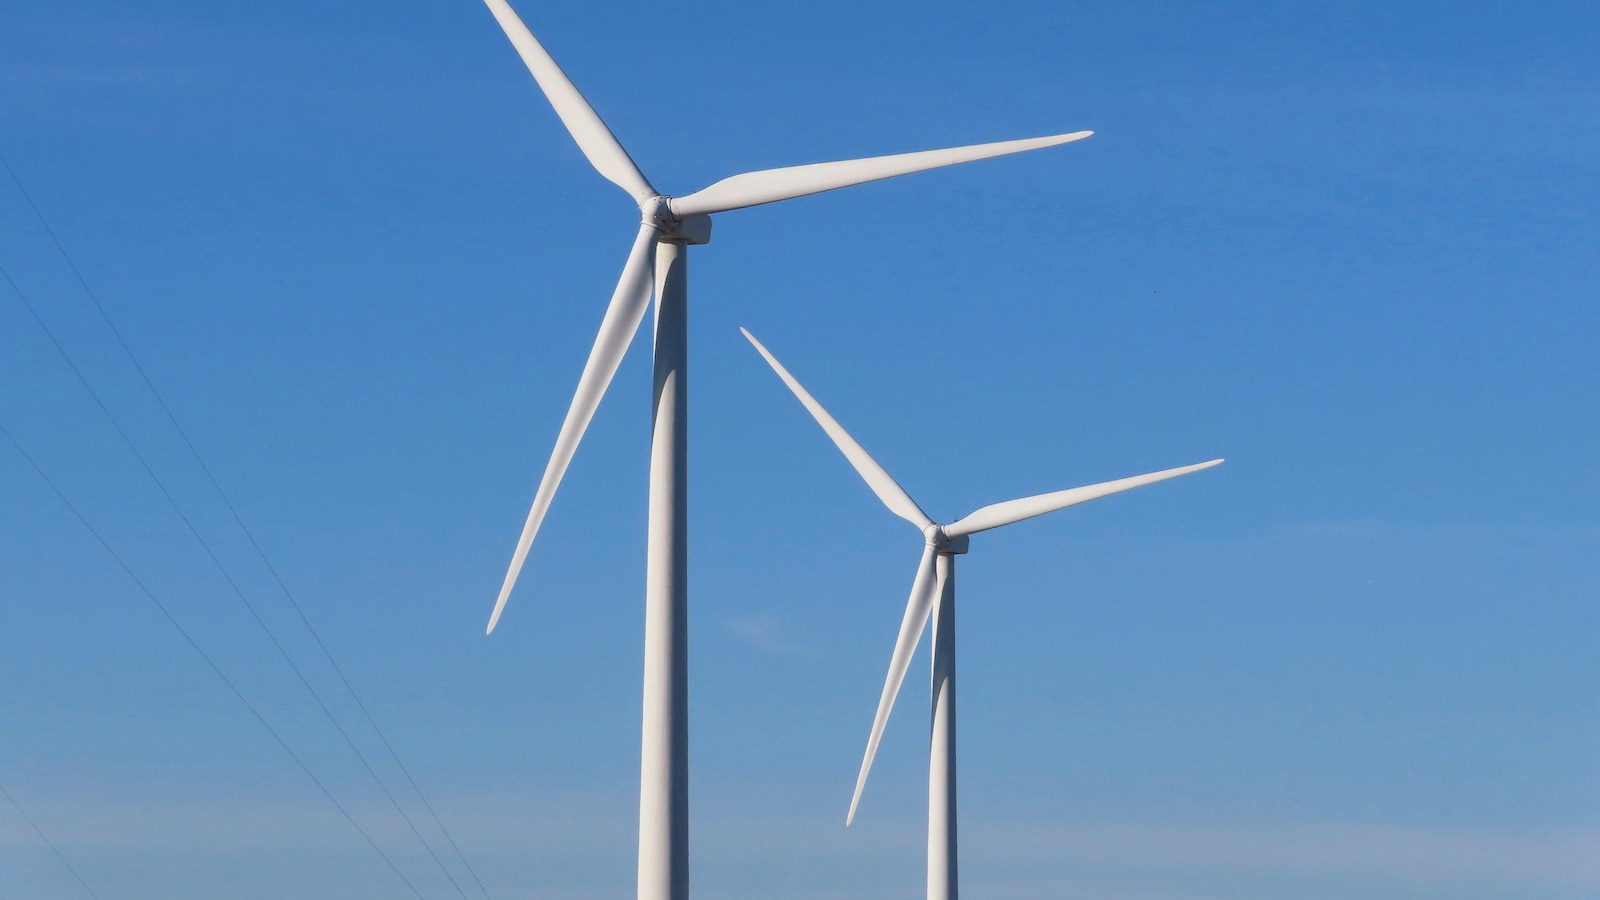 Atlantic Shores offshore wind farm in New Jersey receives crucial approval from US authorities